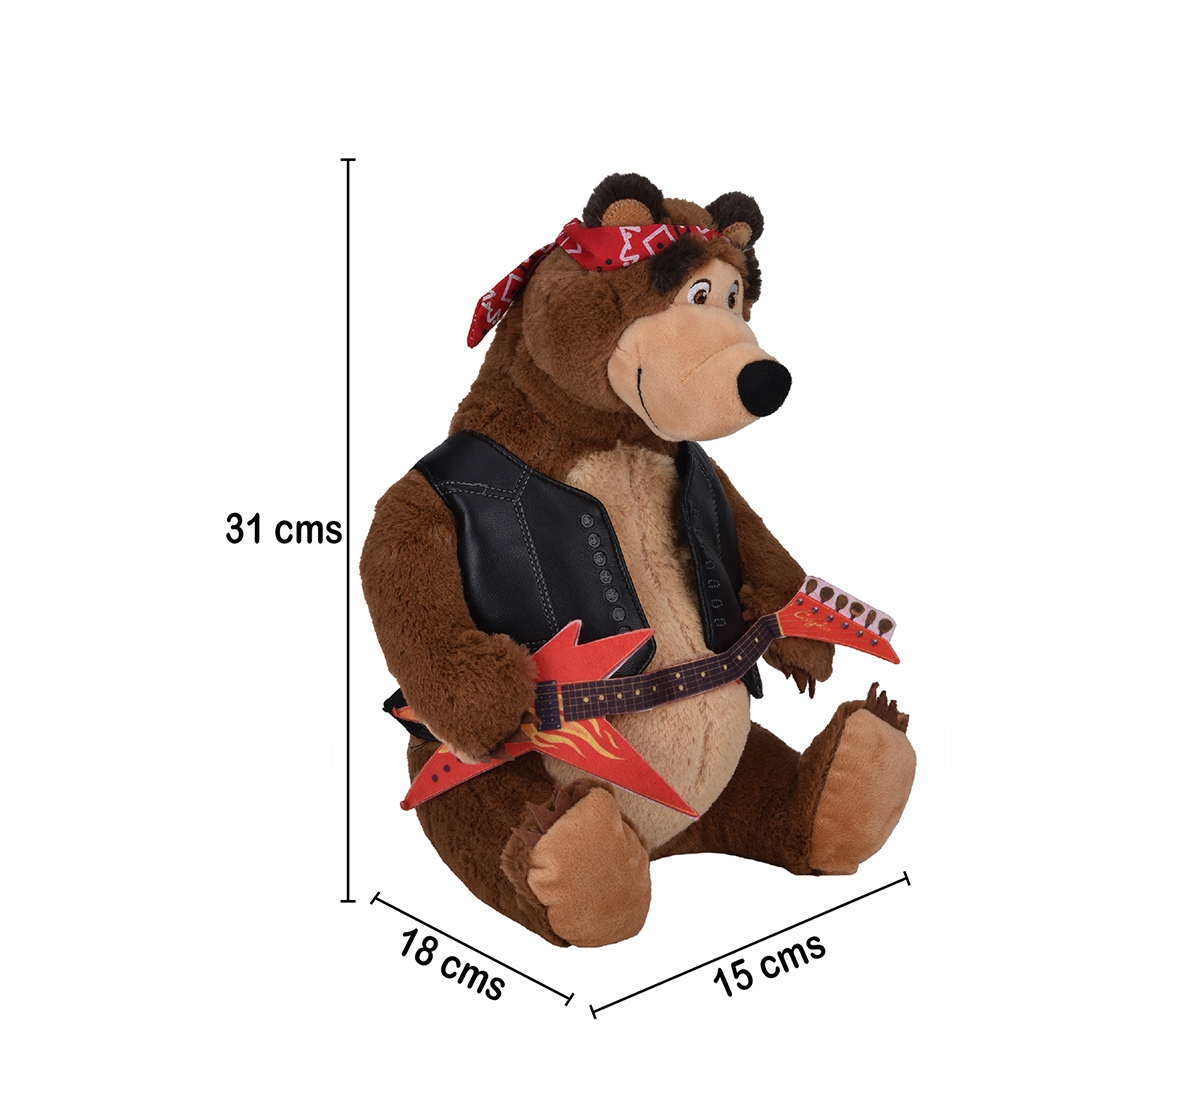 Masha And The Bear | Simba Masha Plush Bear With Melody Fun Interactive Soft Toys for Kids age 3Y+ - 36 Cm (Brown) 4